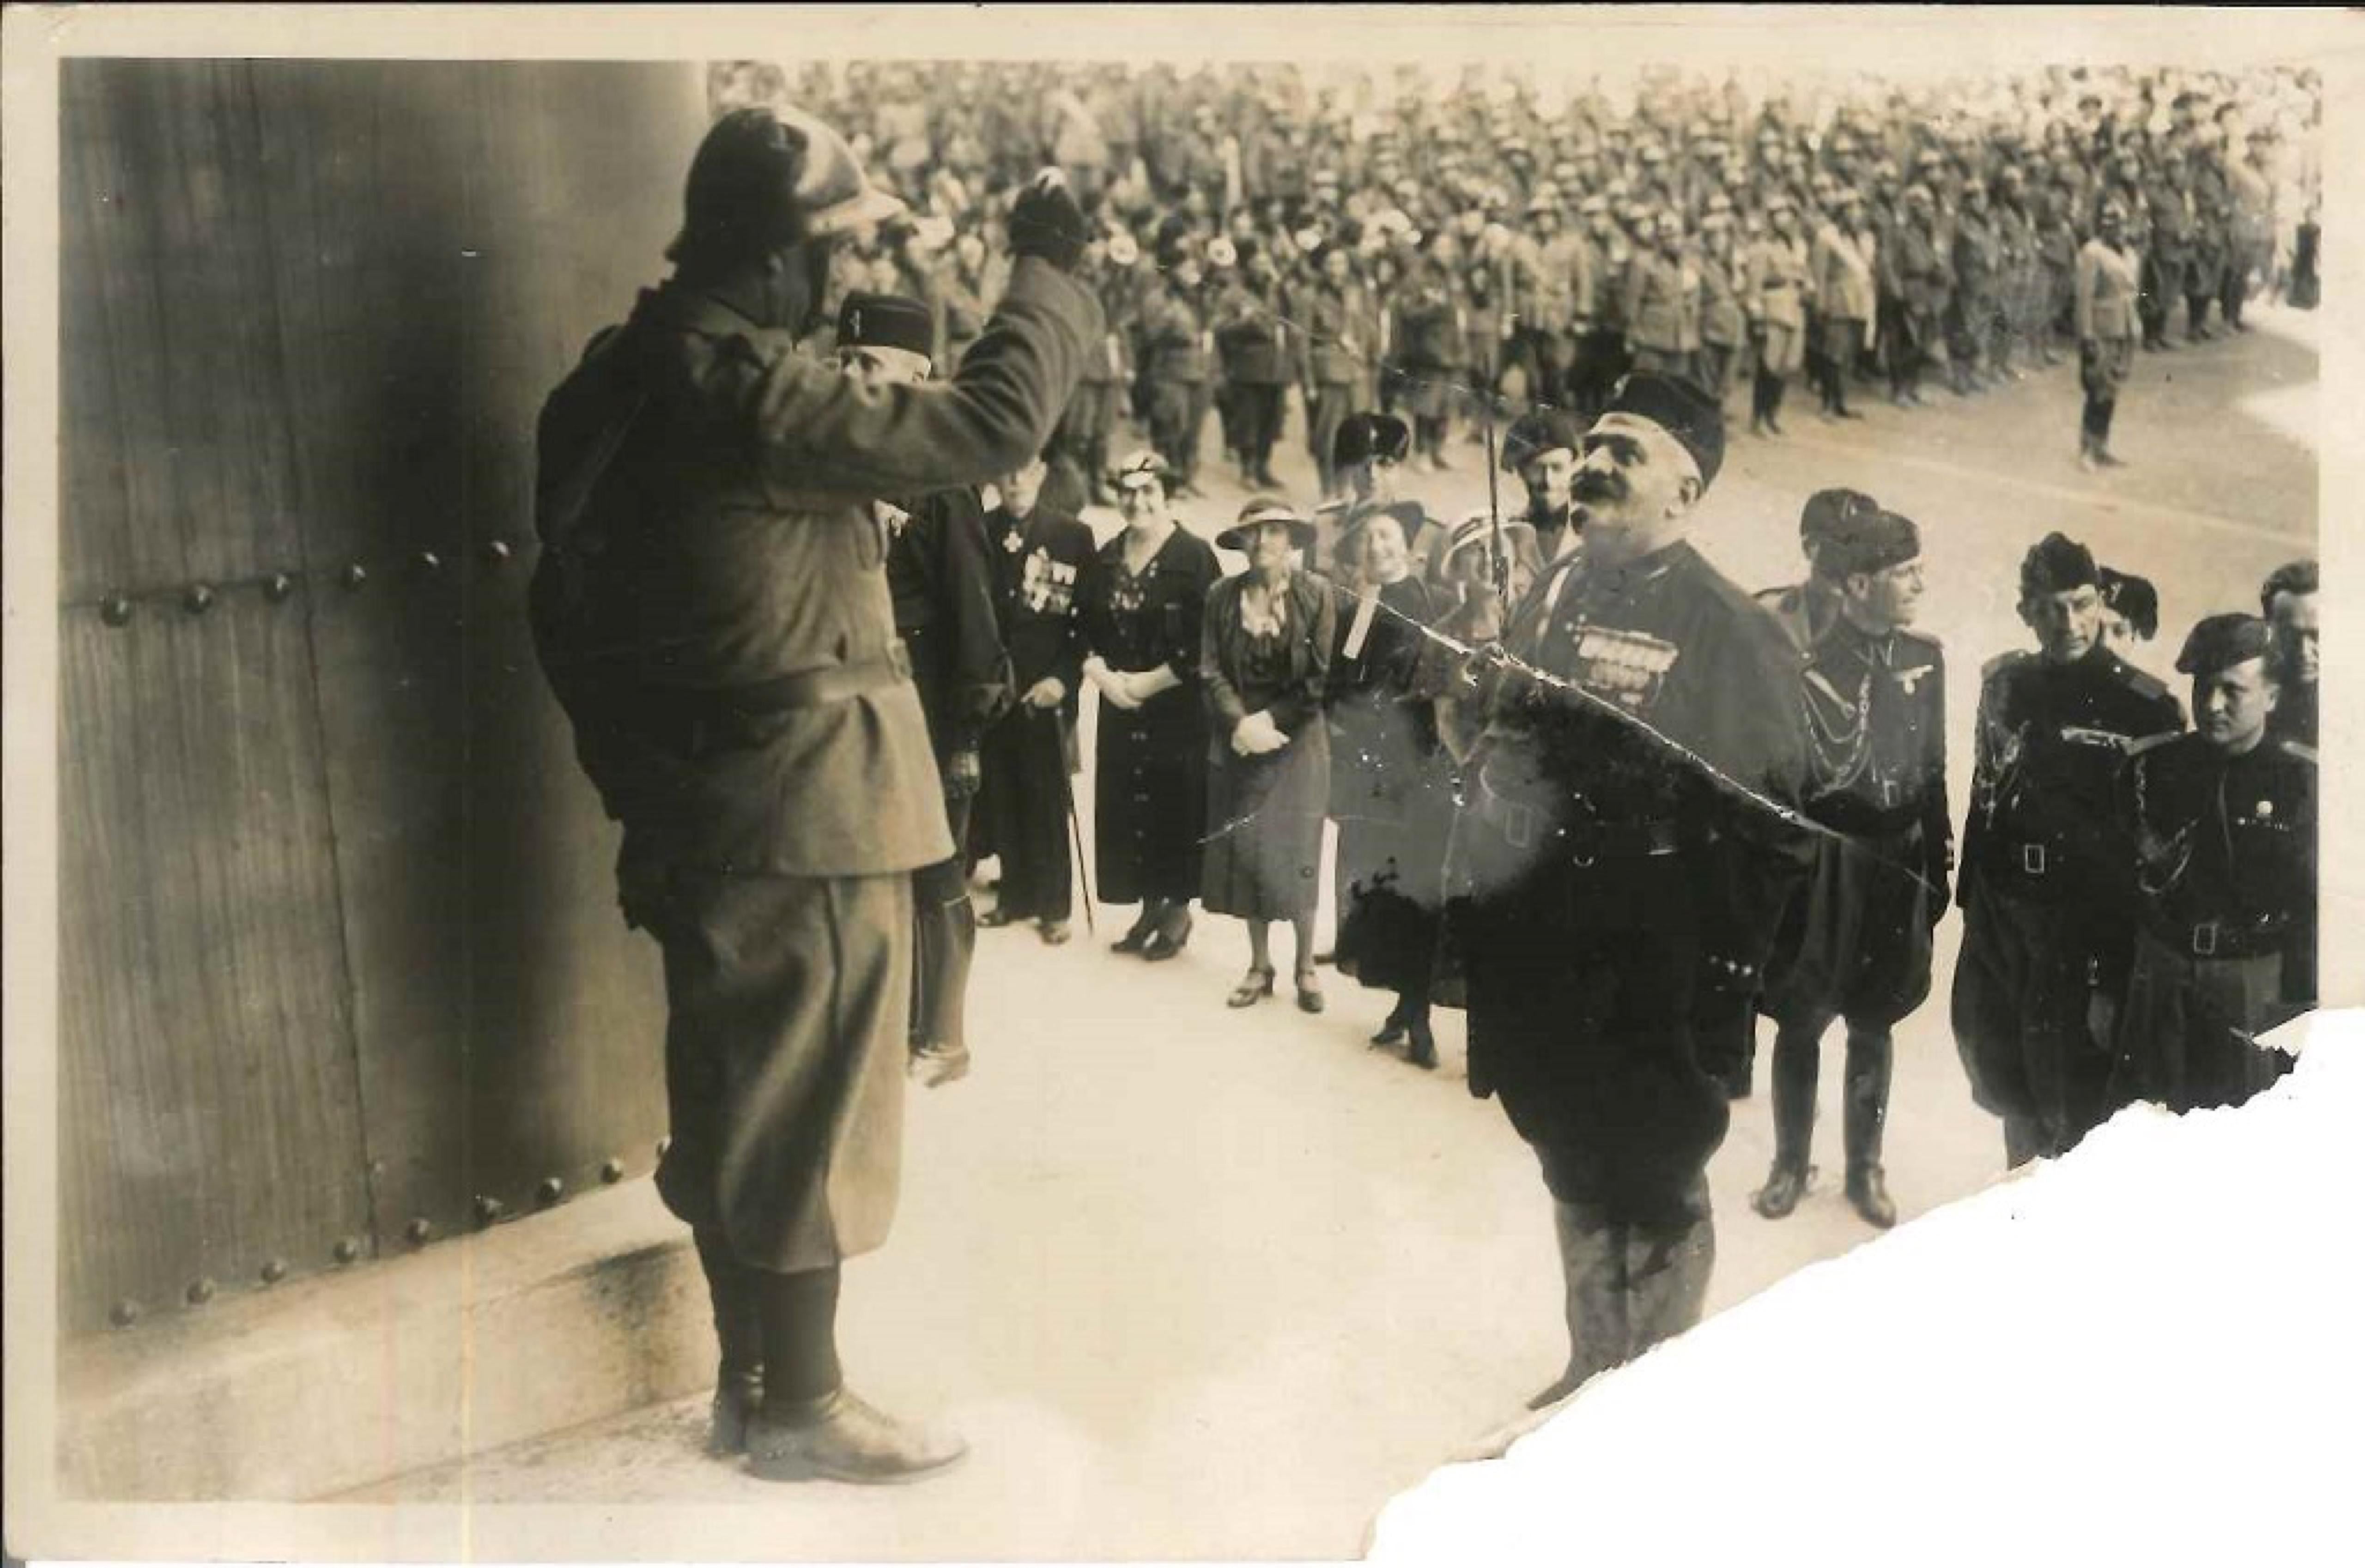 Unknown Portrait Photograph - Ceremonies in Italy during Fascism - Vintage Photo - 1930s